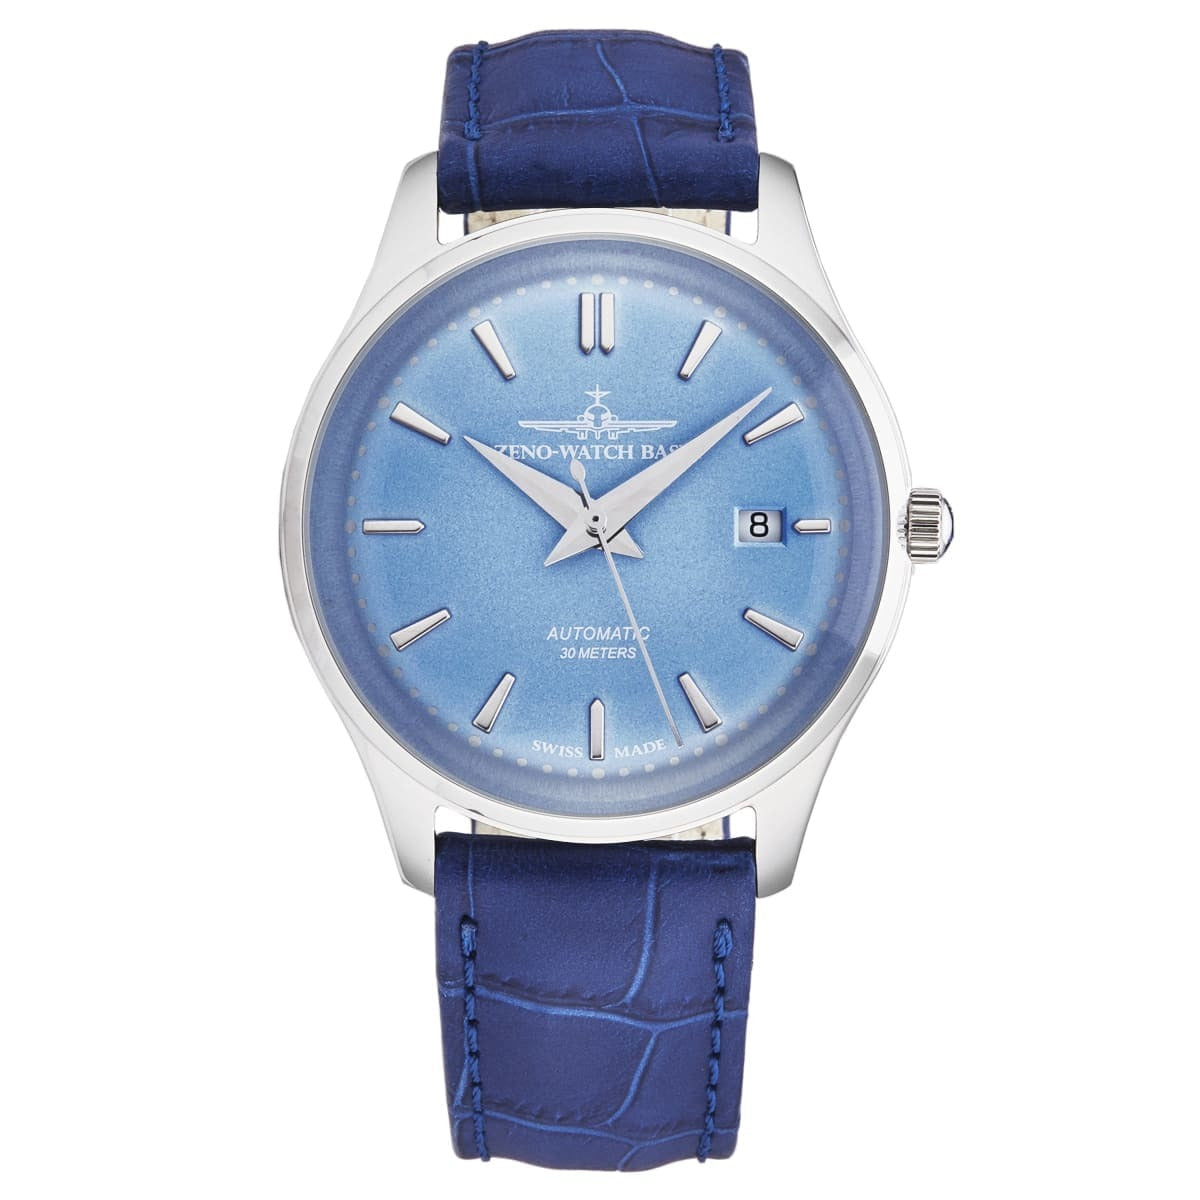 Zeno Men's 'Jules Classic' Limited Edition Blue Dial Blue Leather Strap Automatic Watch 4942-2824-G4